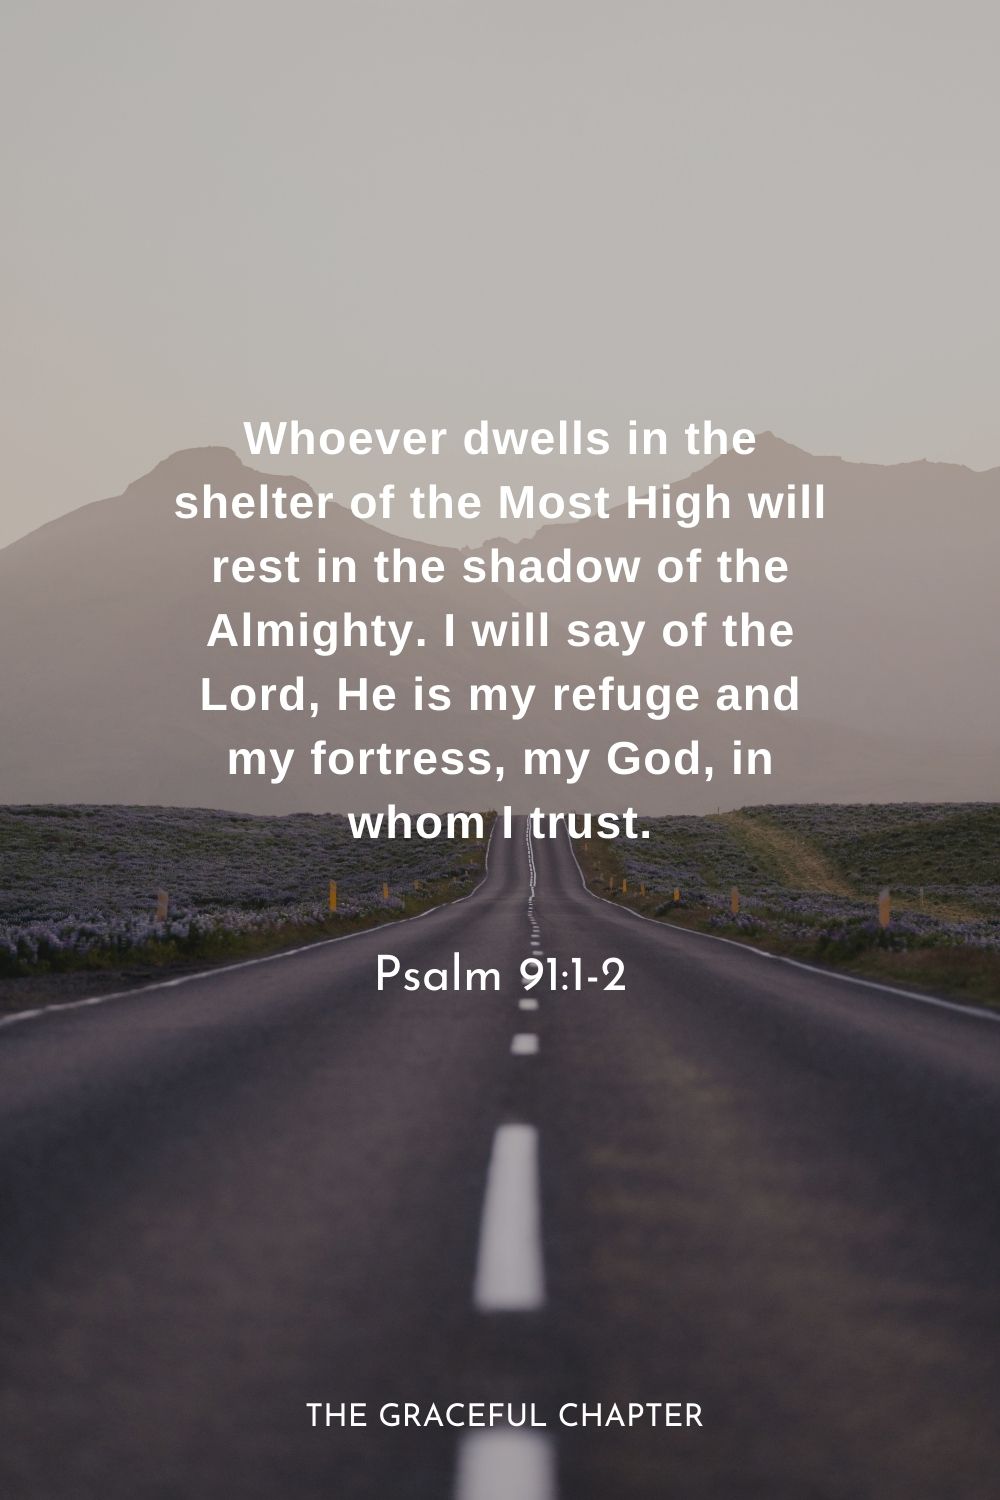 Whoever dwells in the shelter of the Most High will rest in the shadow of the Almighty. I will say of the Lord, He is my refuge and my fortress, my God, in whom I trust.